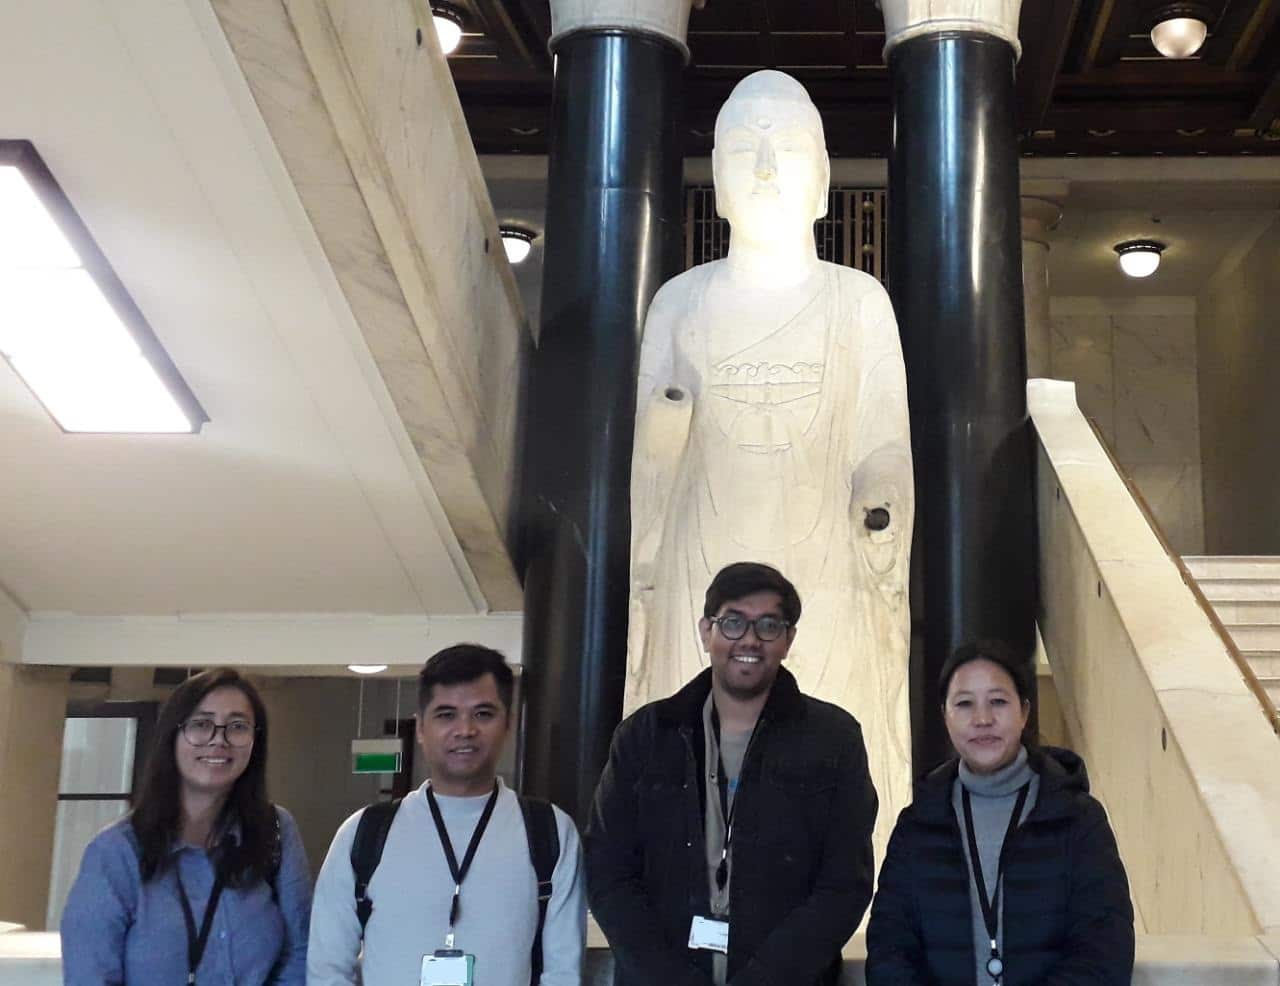 Four people stand in a line in front of a large statue depicting a human figure